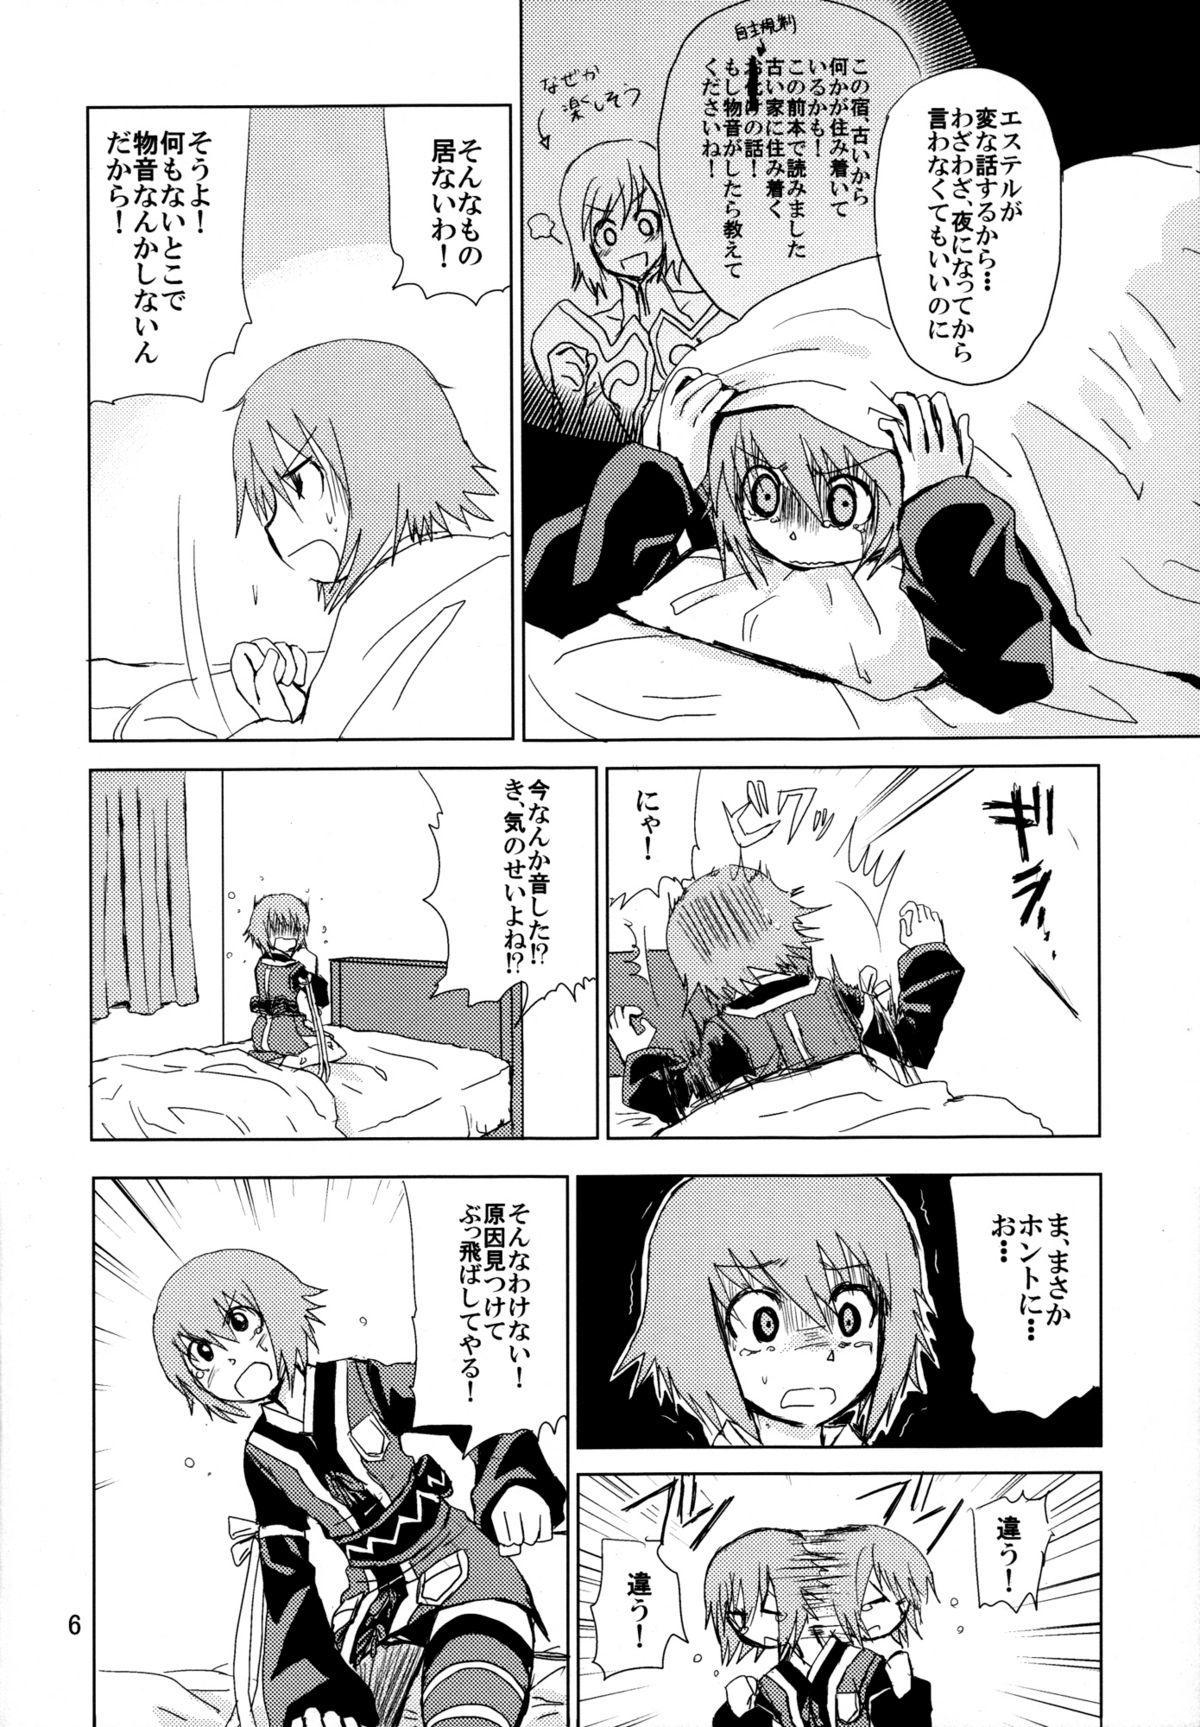 Grandmother How to Calm Rita's Fears - Tales of vesperia Jeune Mec - Page 6